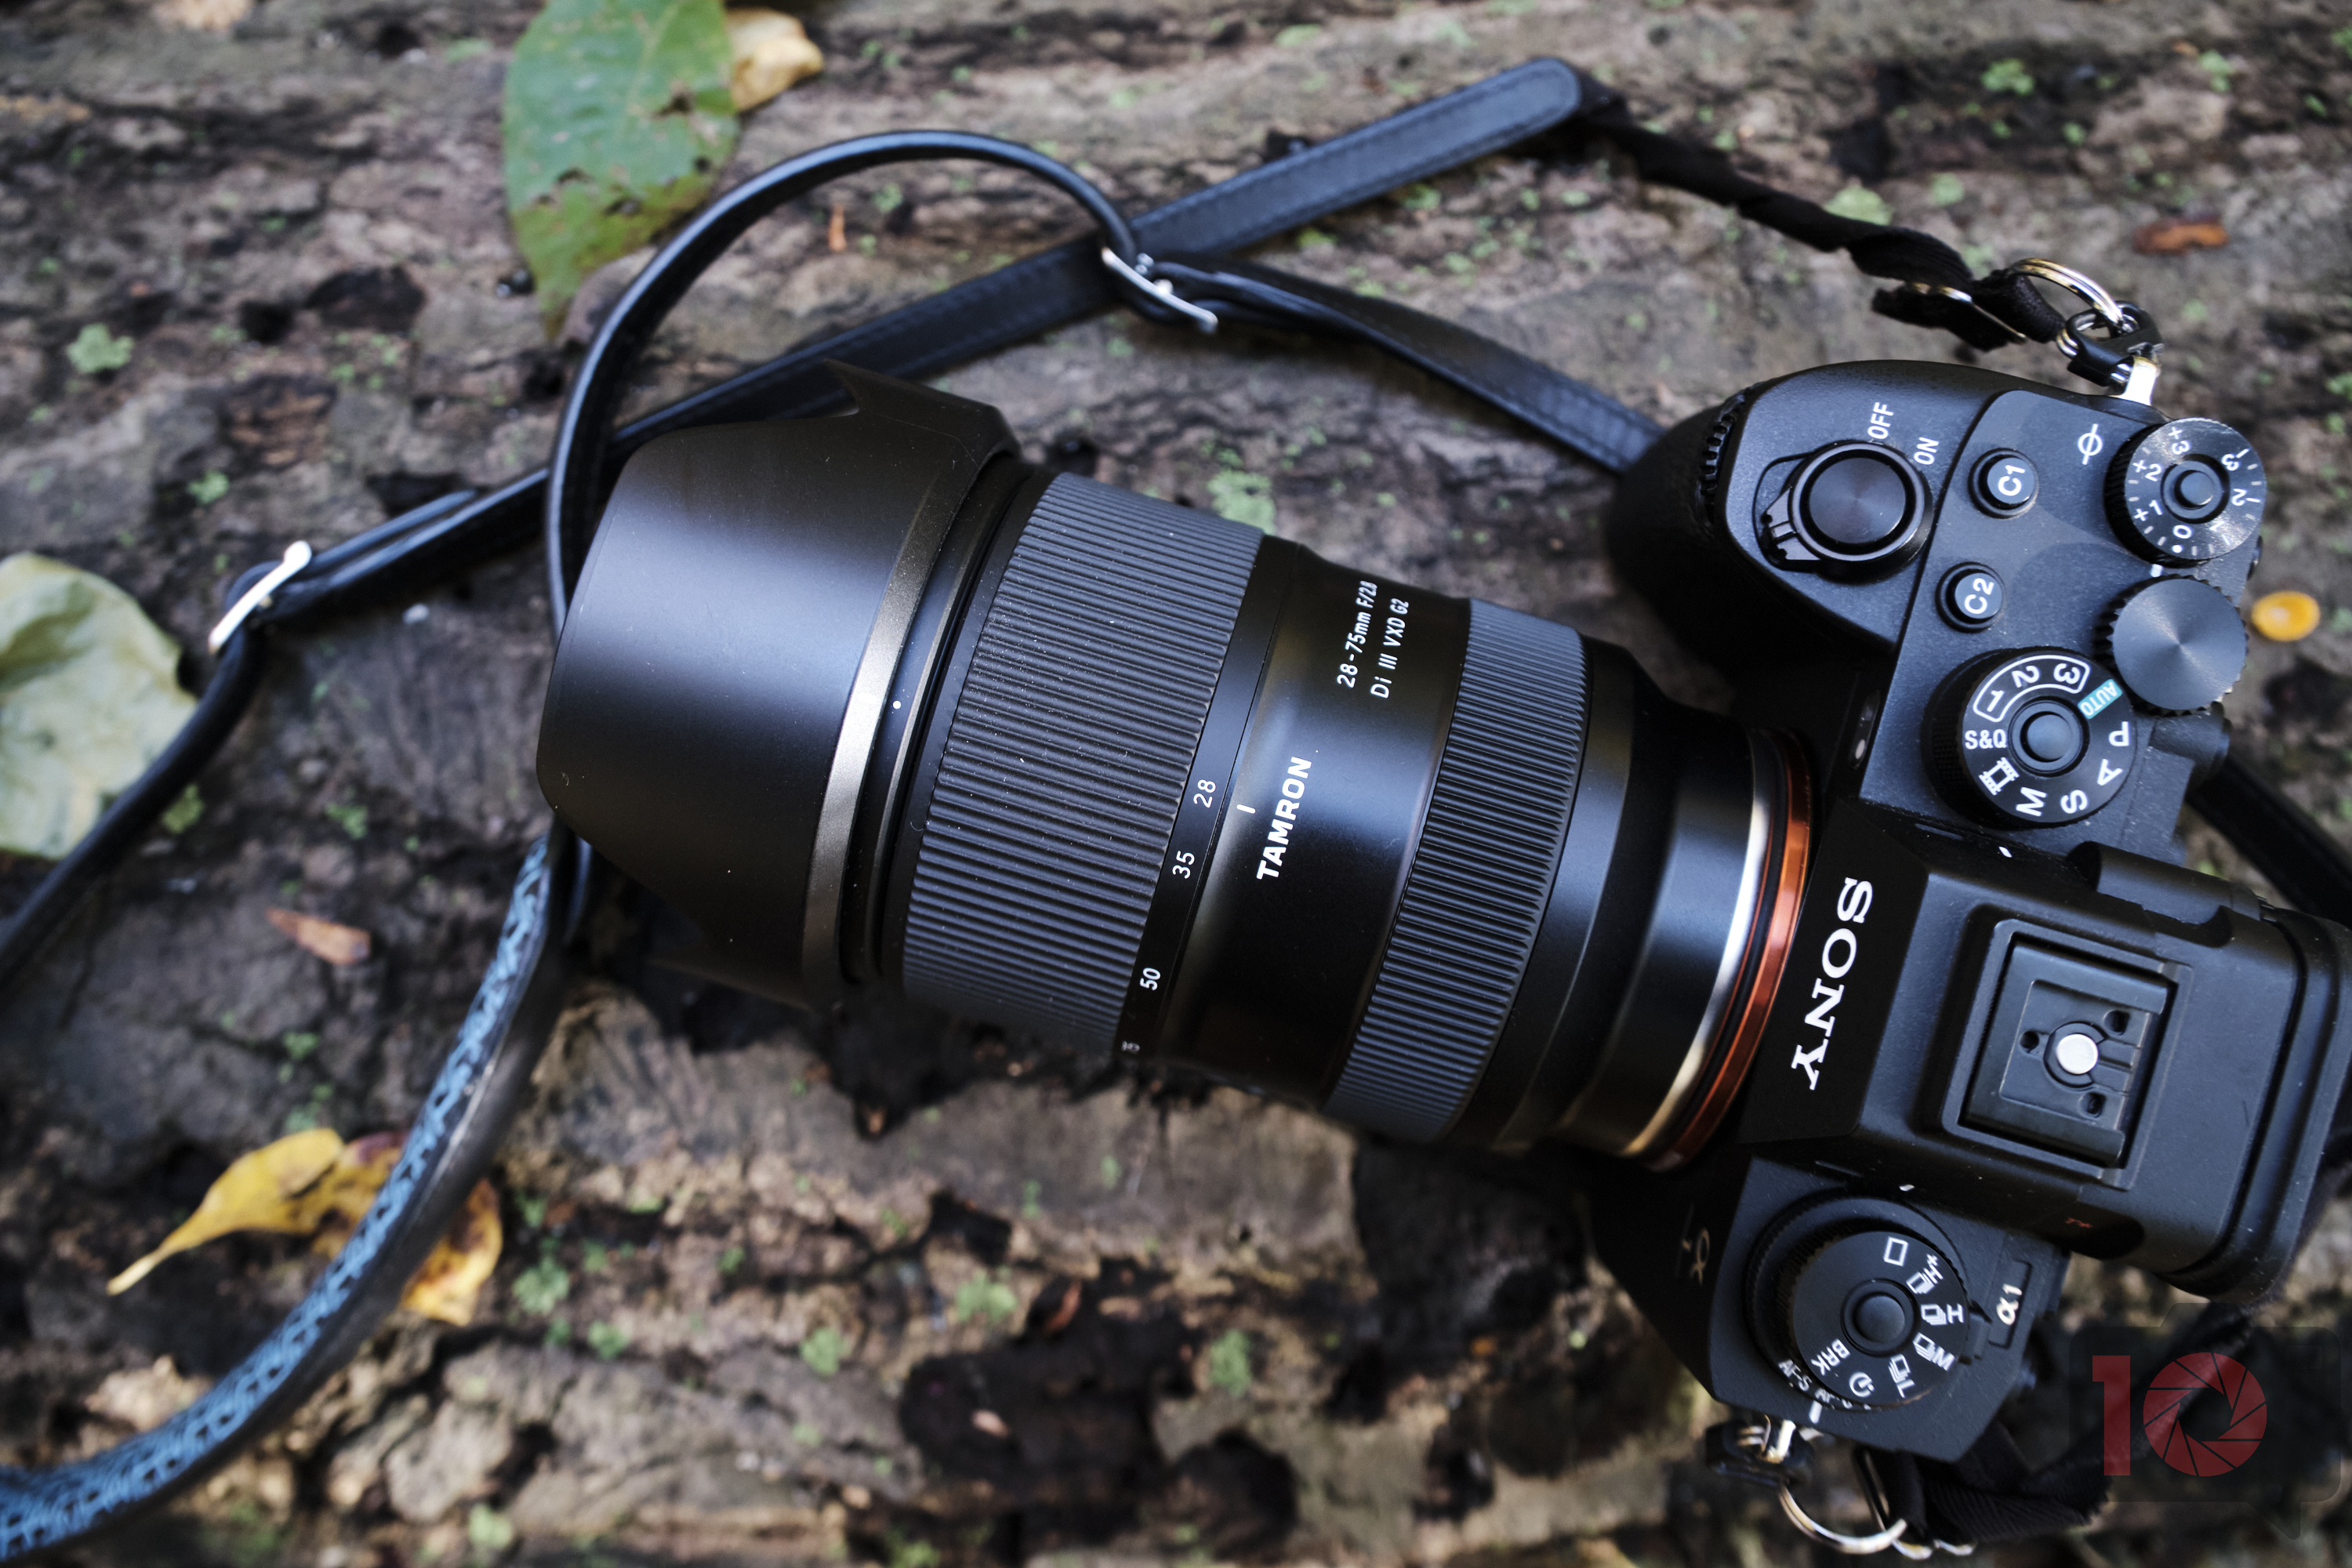 Chris Gampat The Phoblographer Tamron 28-75mm f2.8 G2 review product images 3.51-75s1600